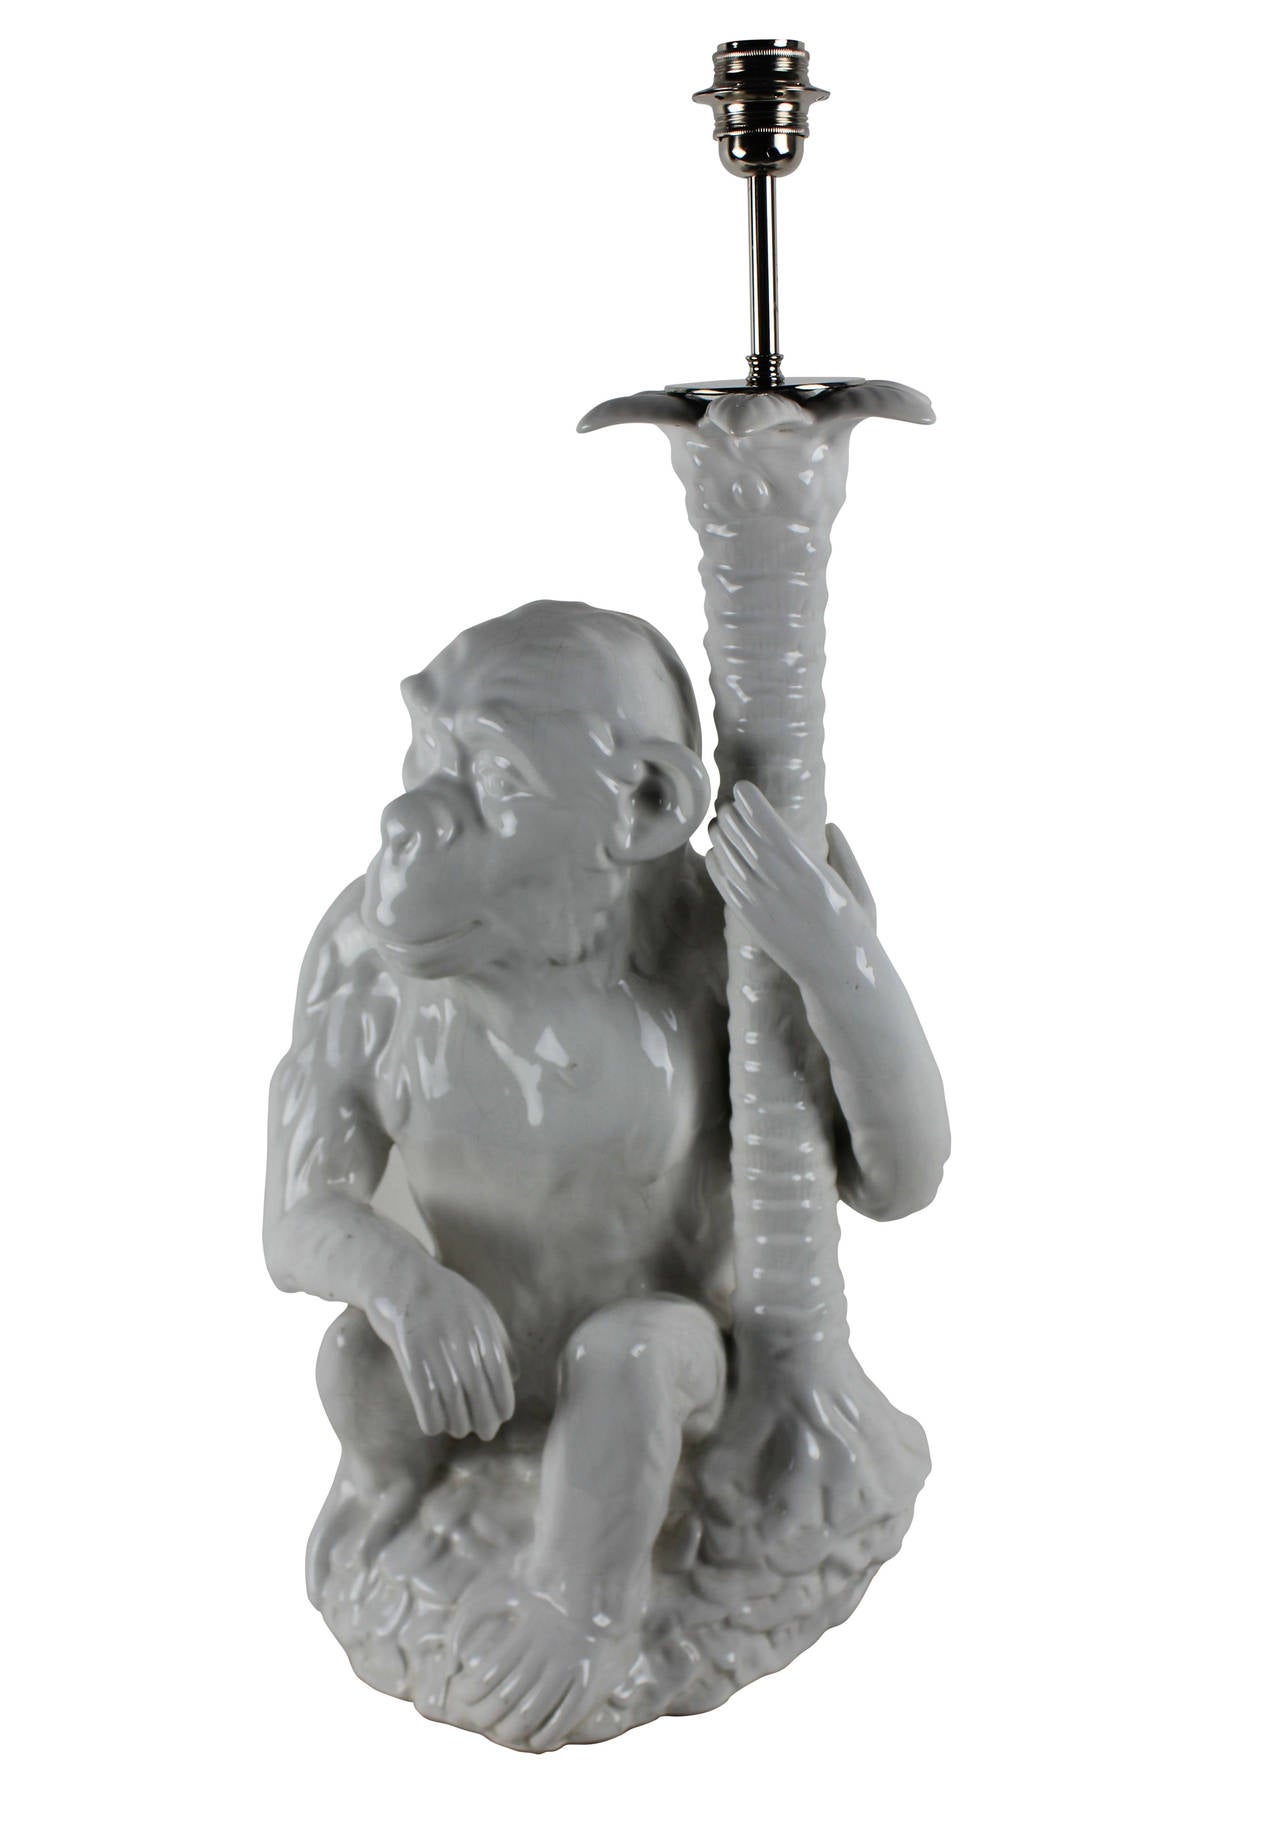 A Portuguese white glazed ceramic lamp depicting a monkey and palm tree.